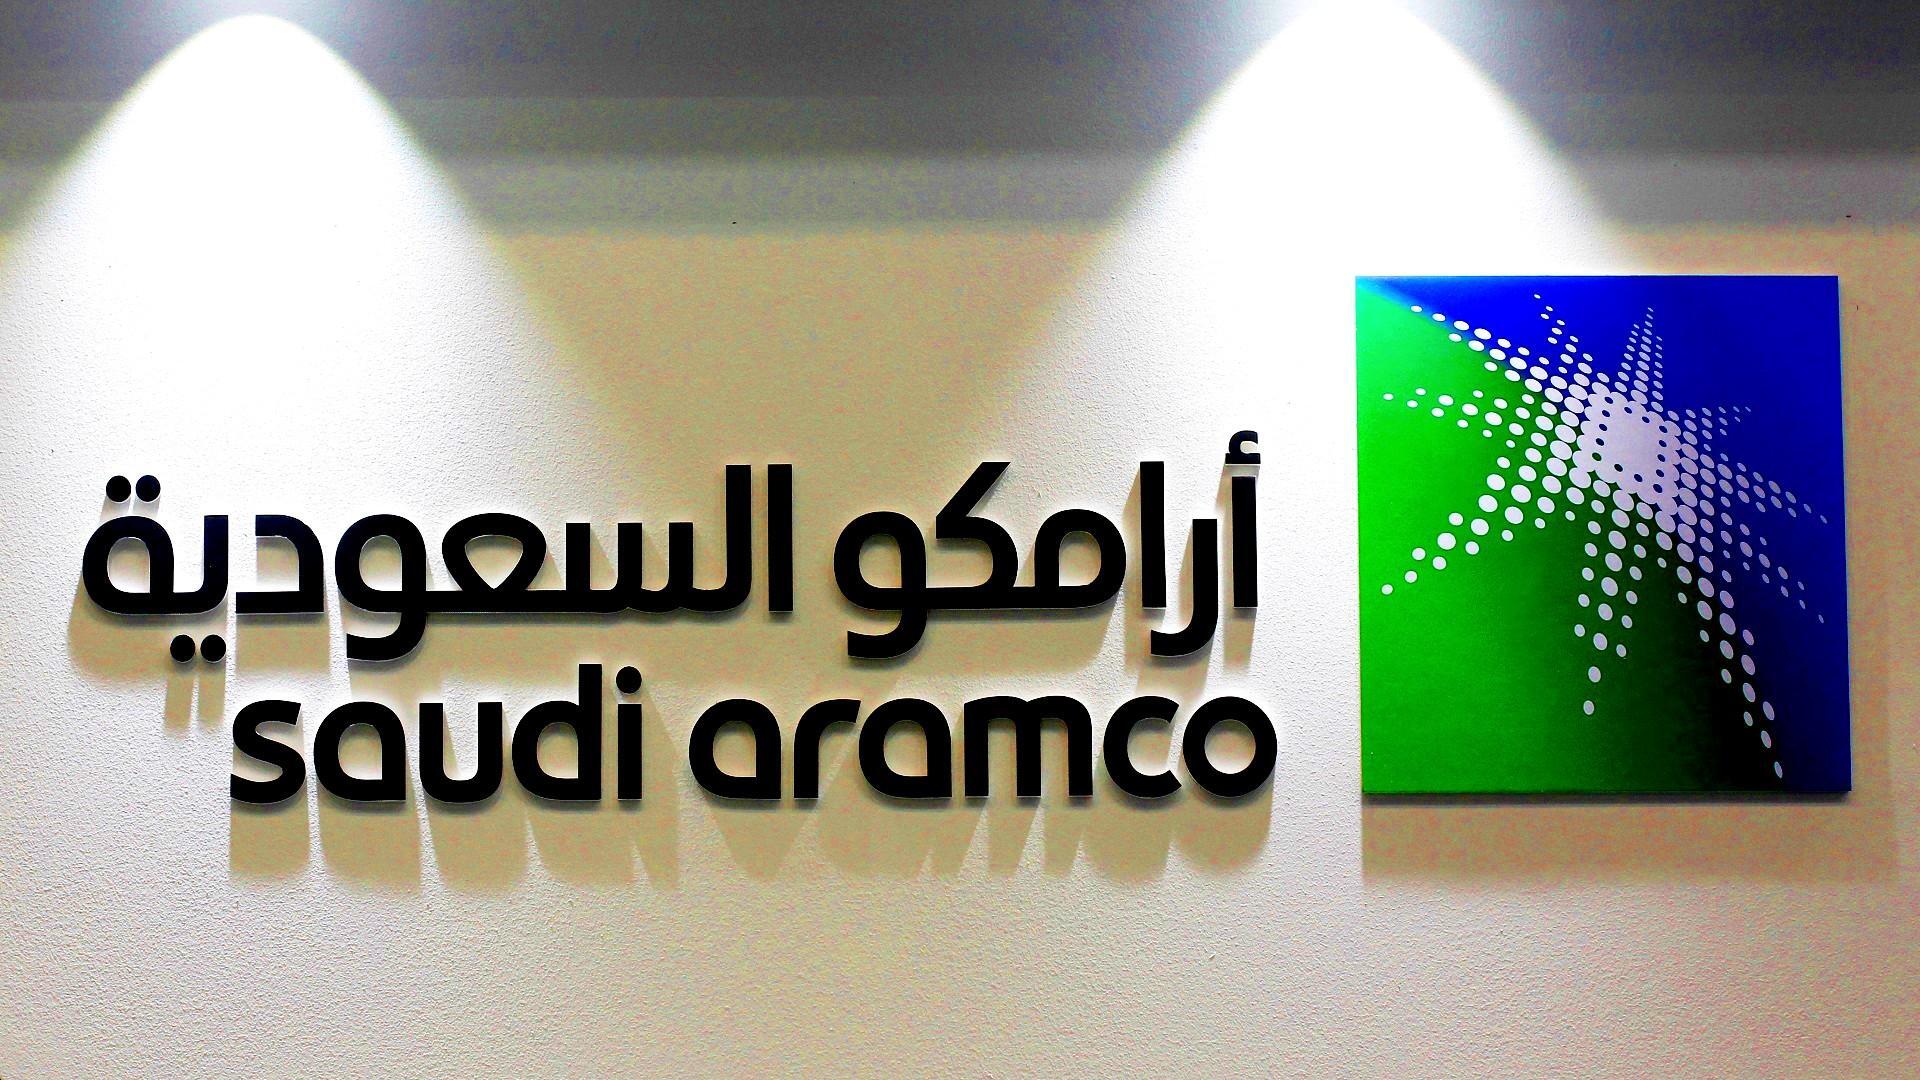 Houthi Drone Attacks On 2 Saudi Aramco Oil Facilities Spark Fires